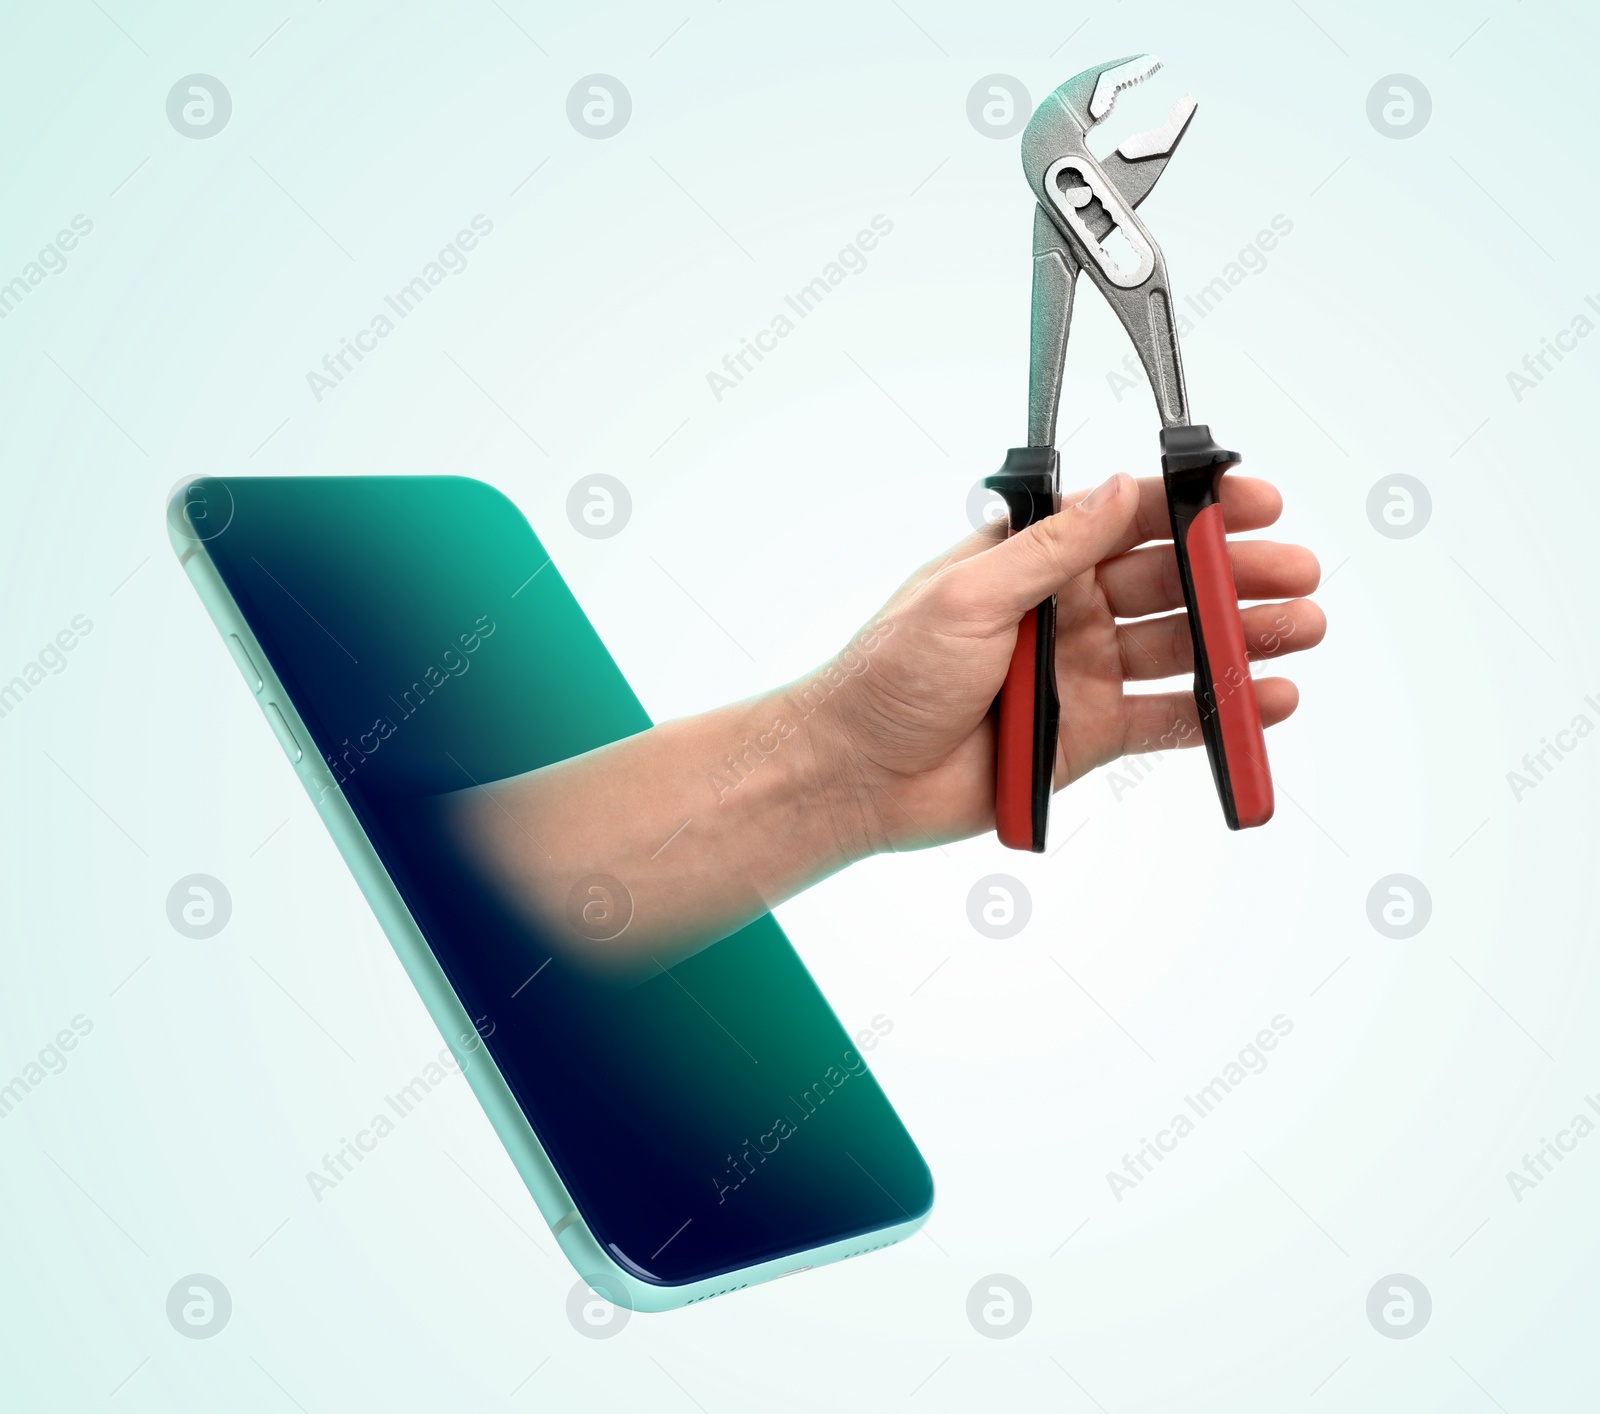 Image of Repair service - just call. Closeup view of man with tool and smartphone on light background